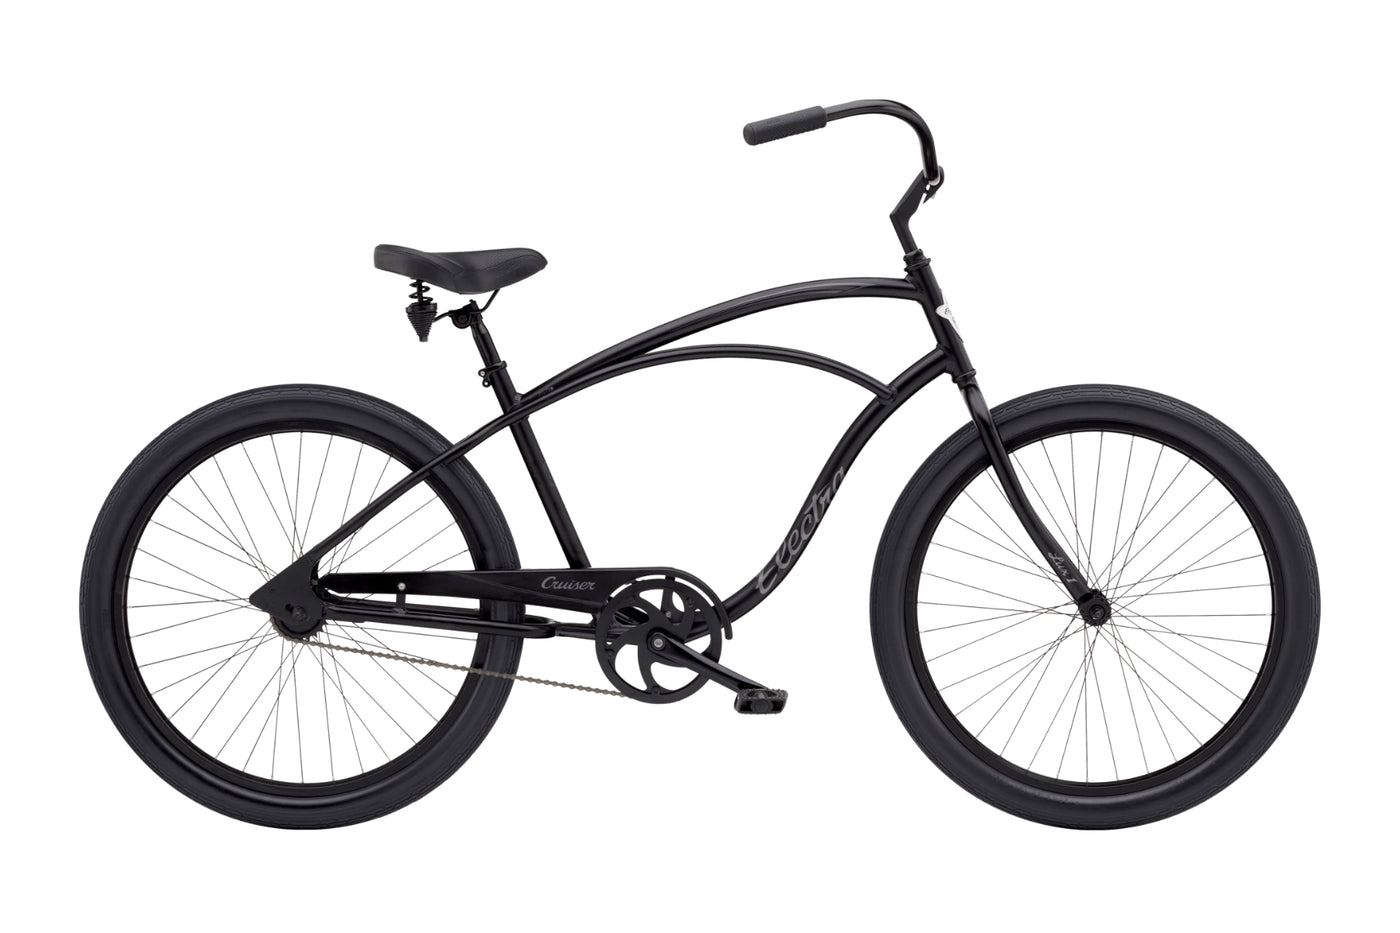 Electra Cruiser Lux 1 Step-Over - Black